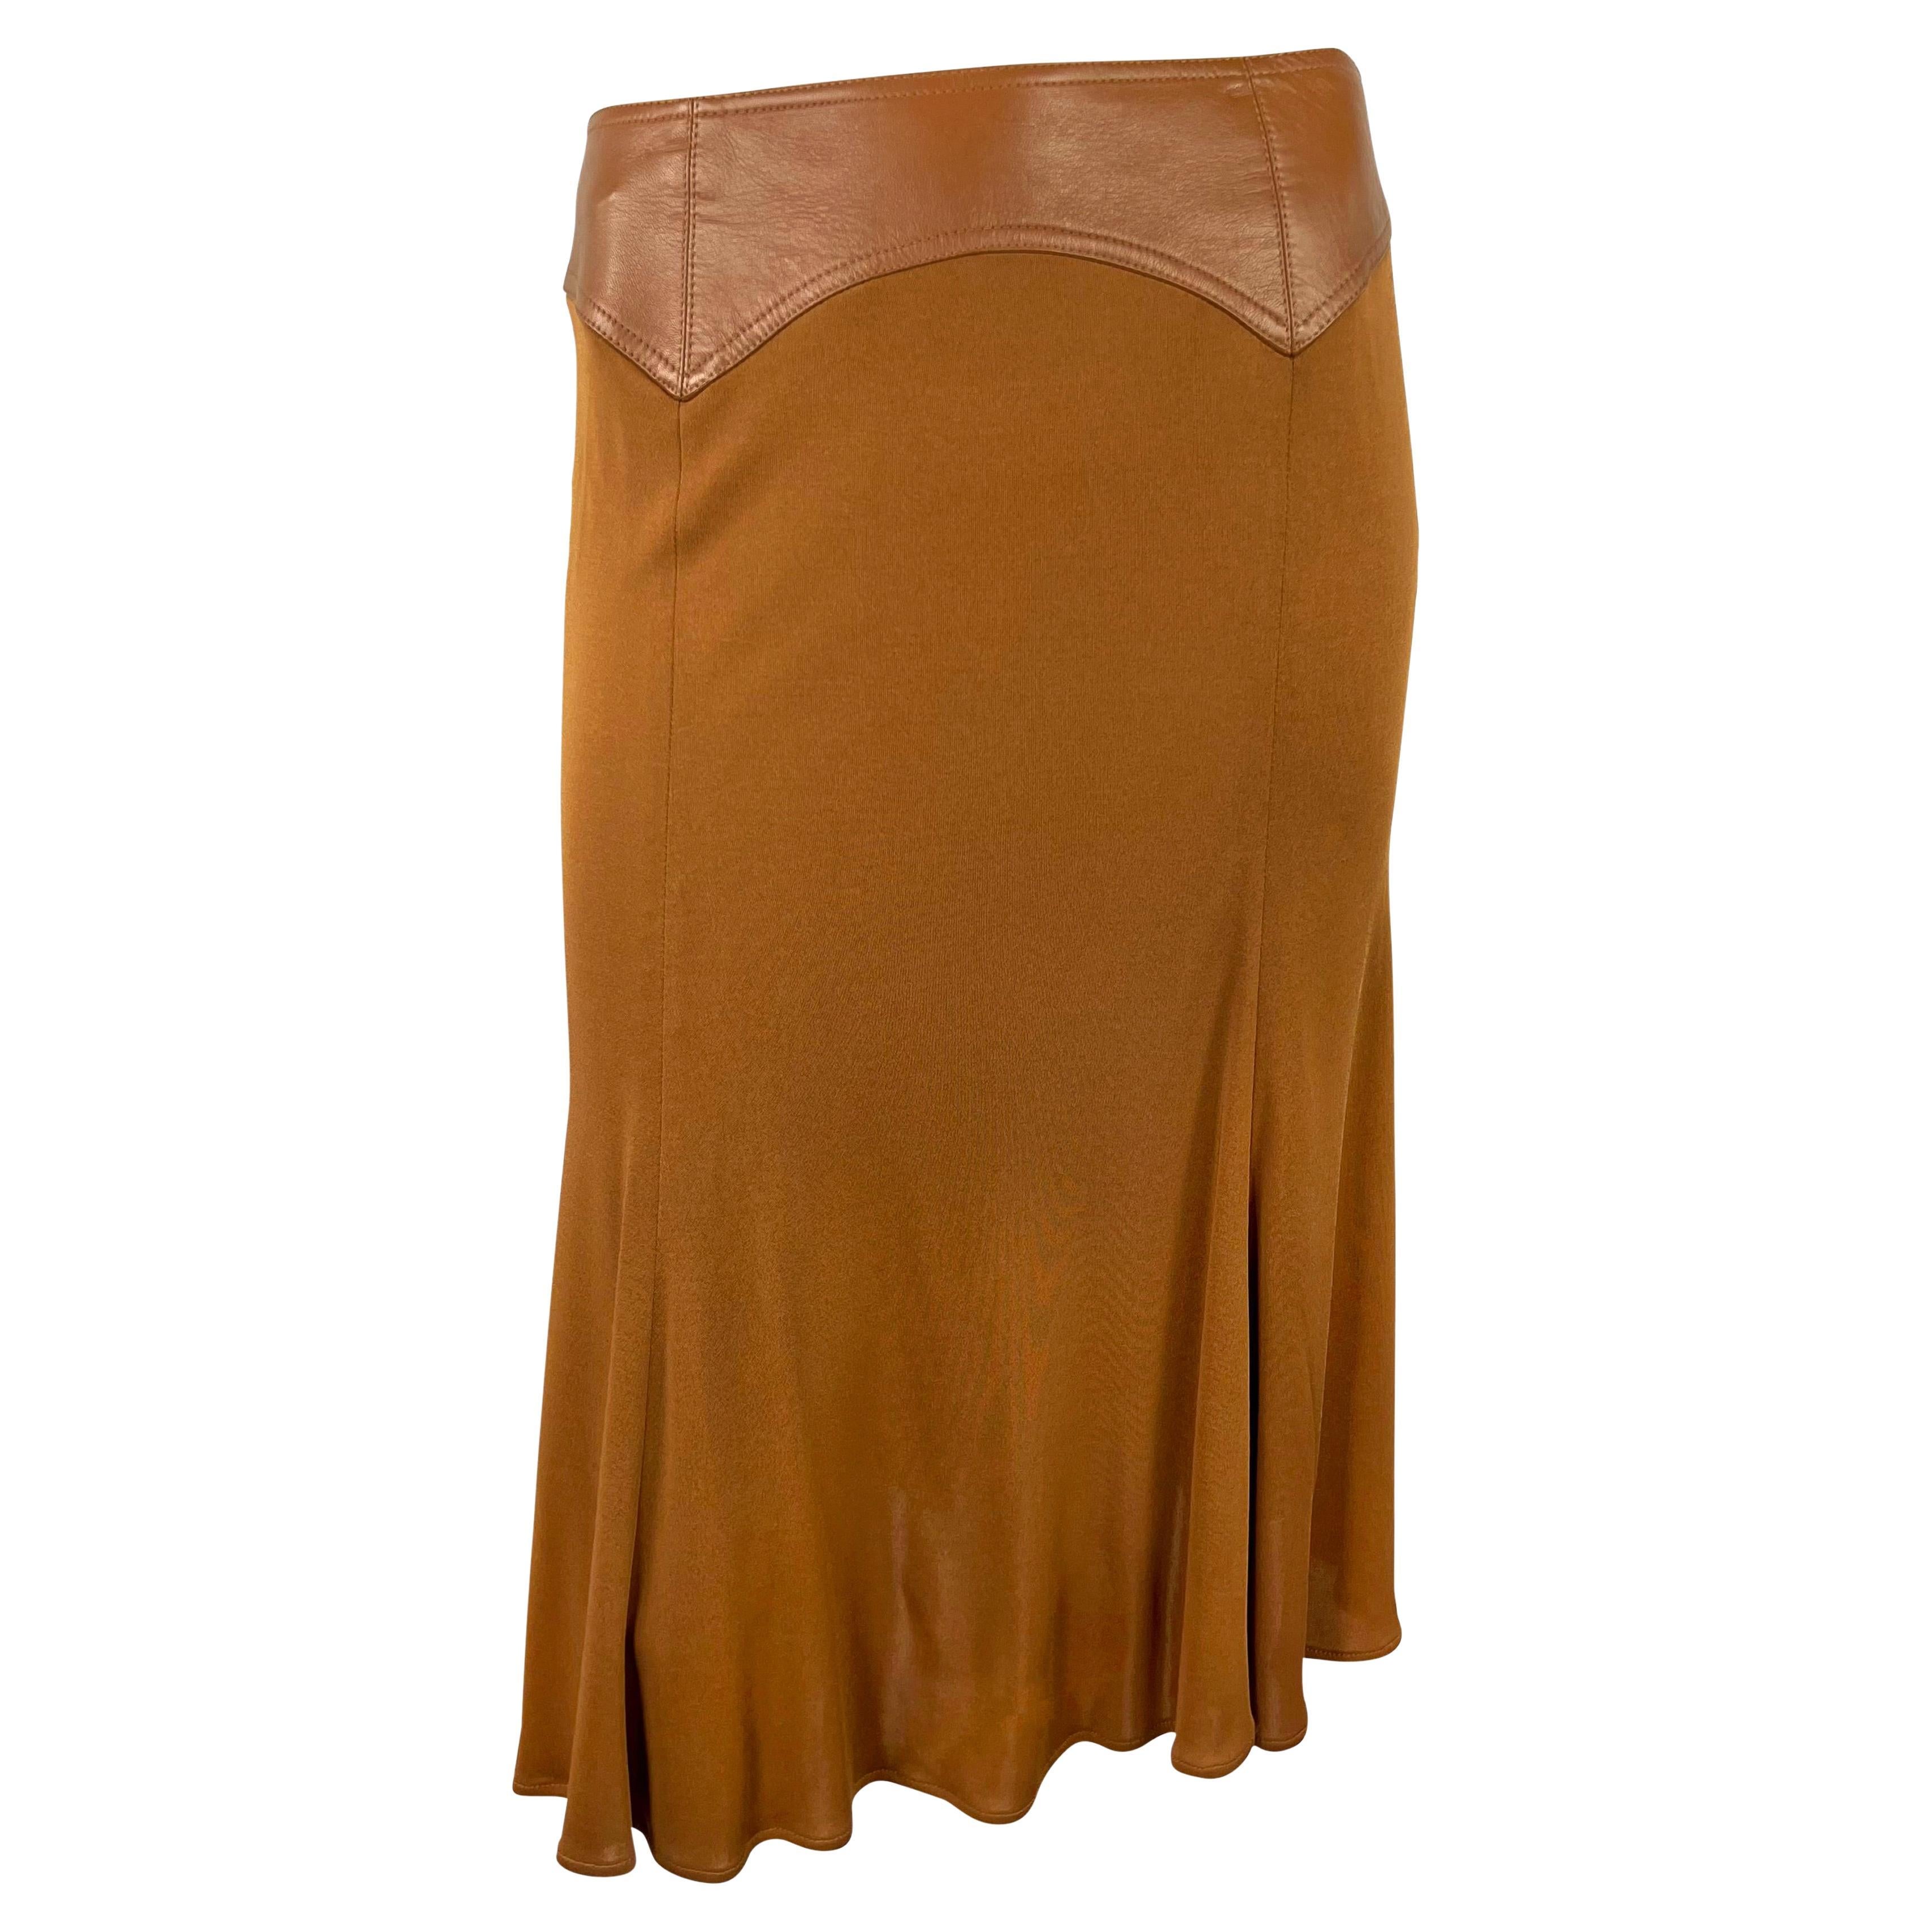 F/W 2001 Gianni Versace by Donatella Light Saddle Brown Leather Bodycon Skirt For Sale